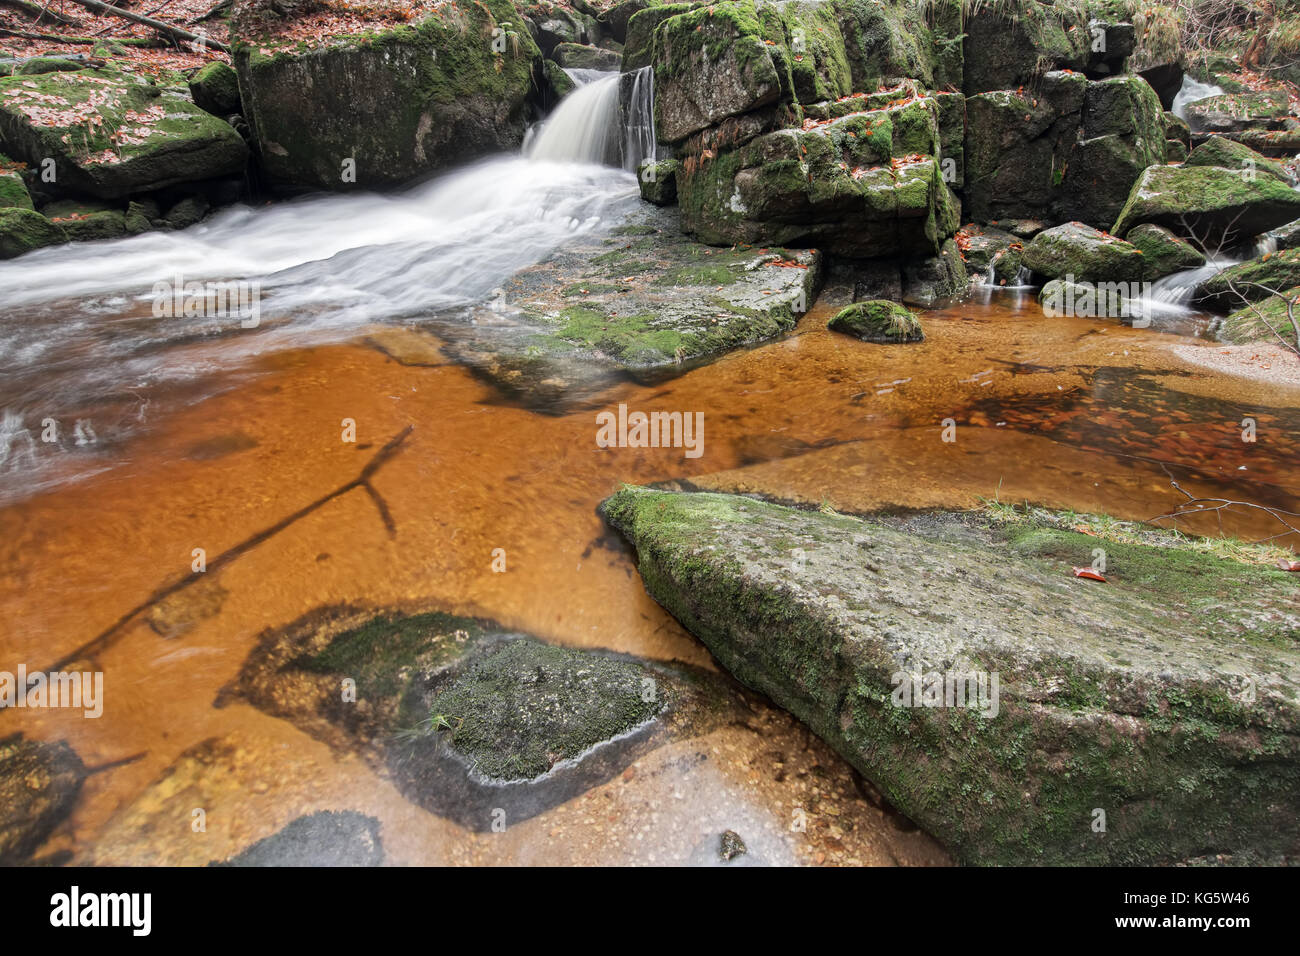 Flowing water through boulders on a forest brook Stock Photo